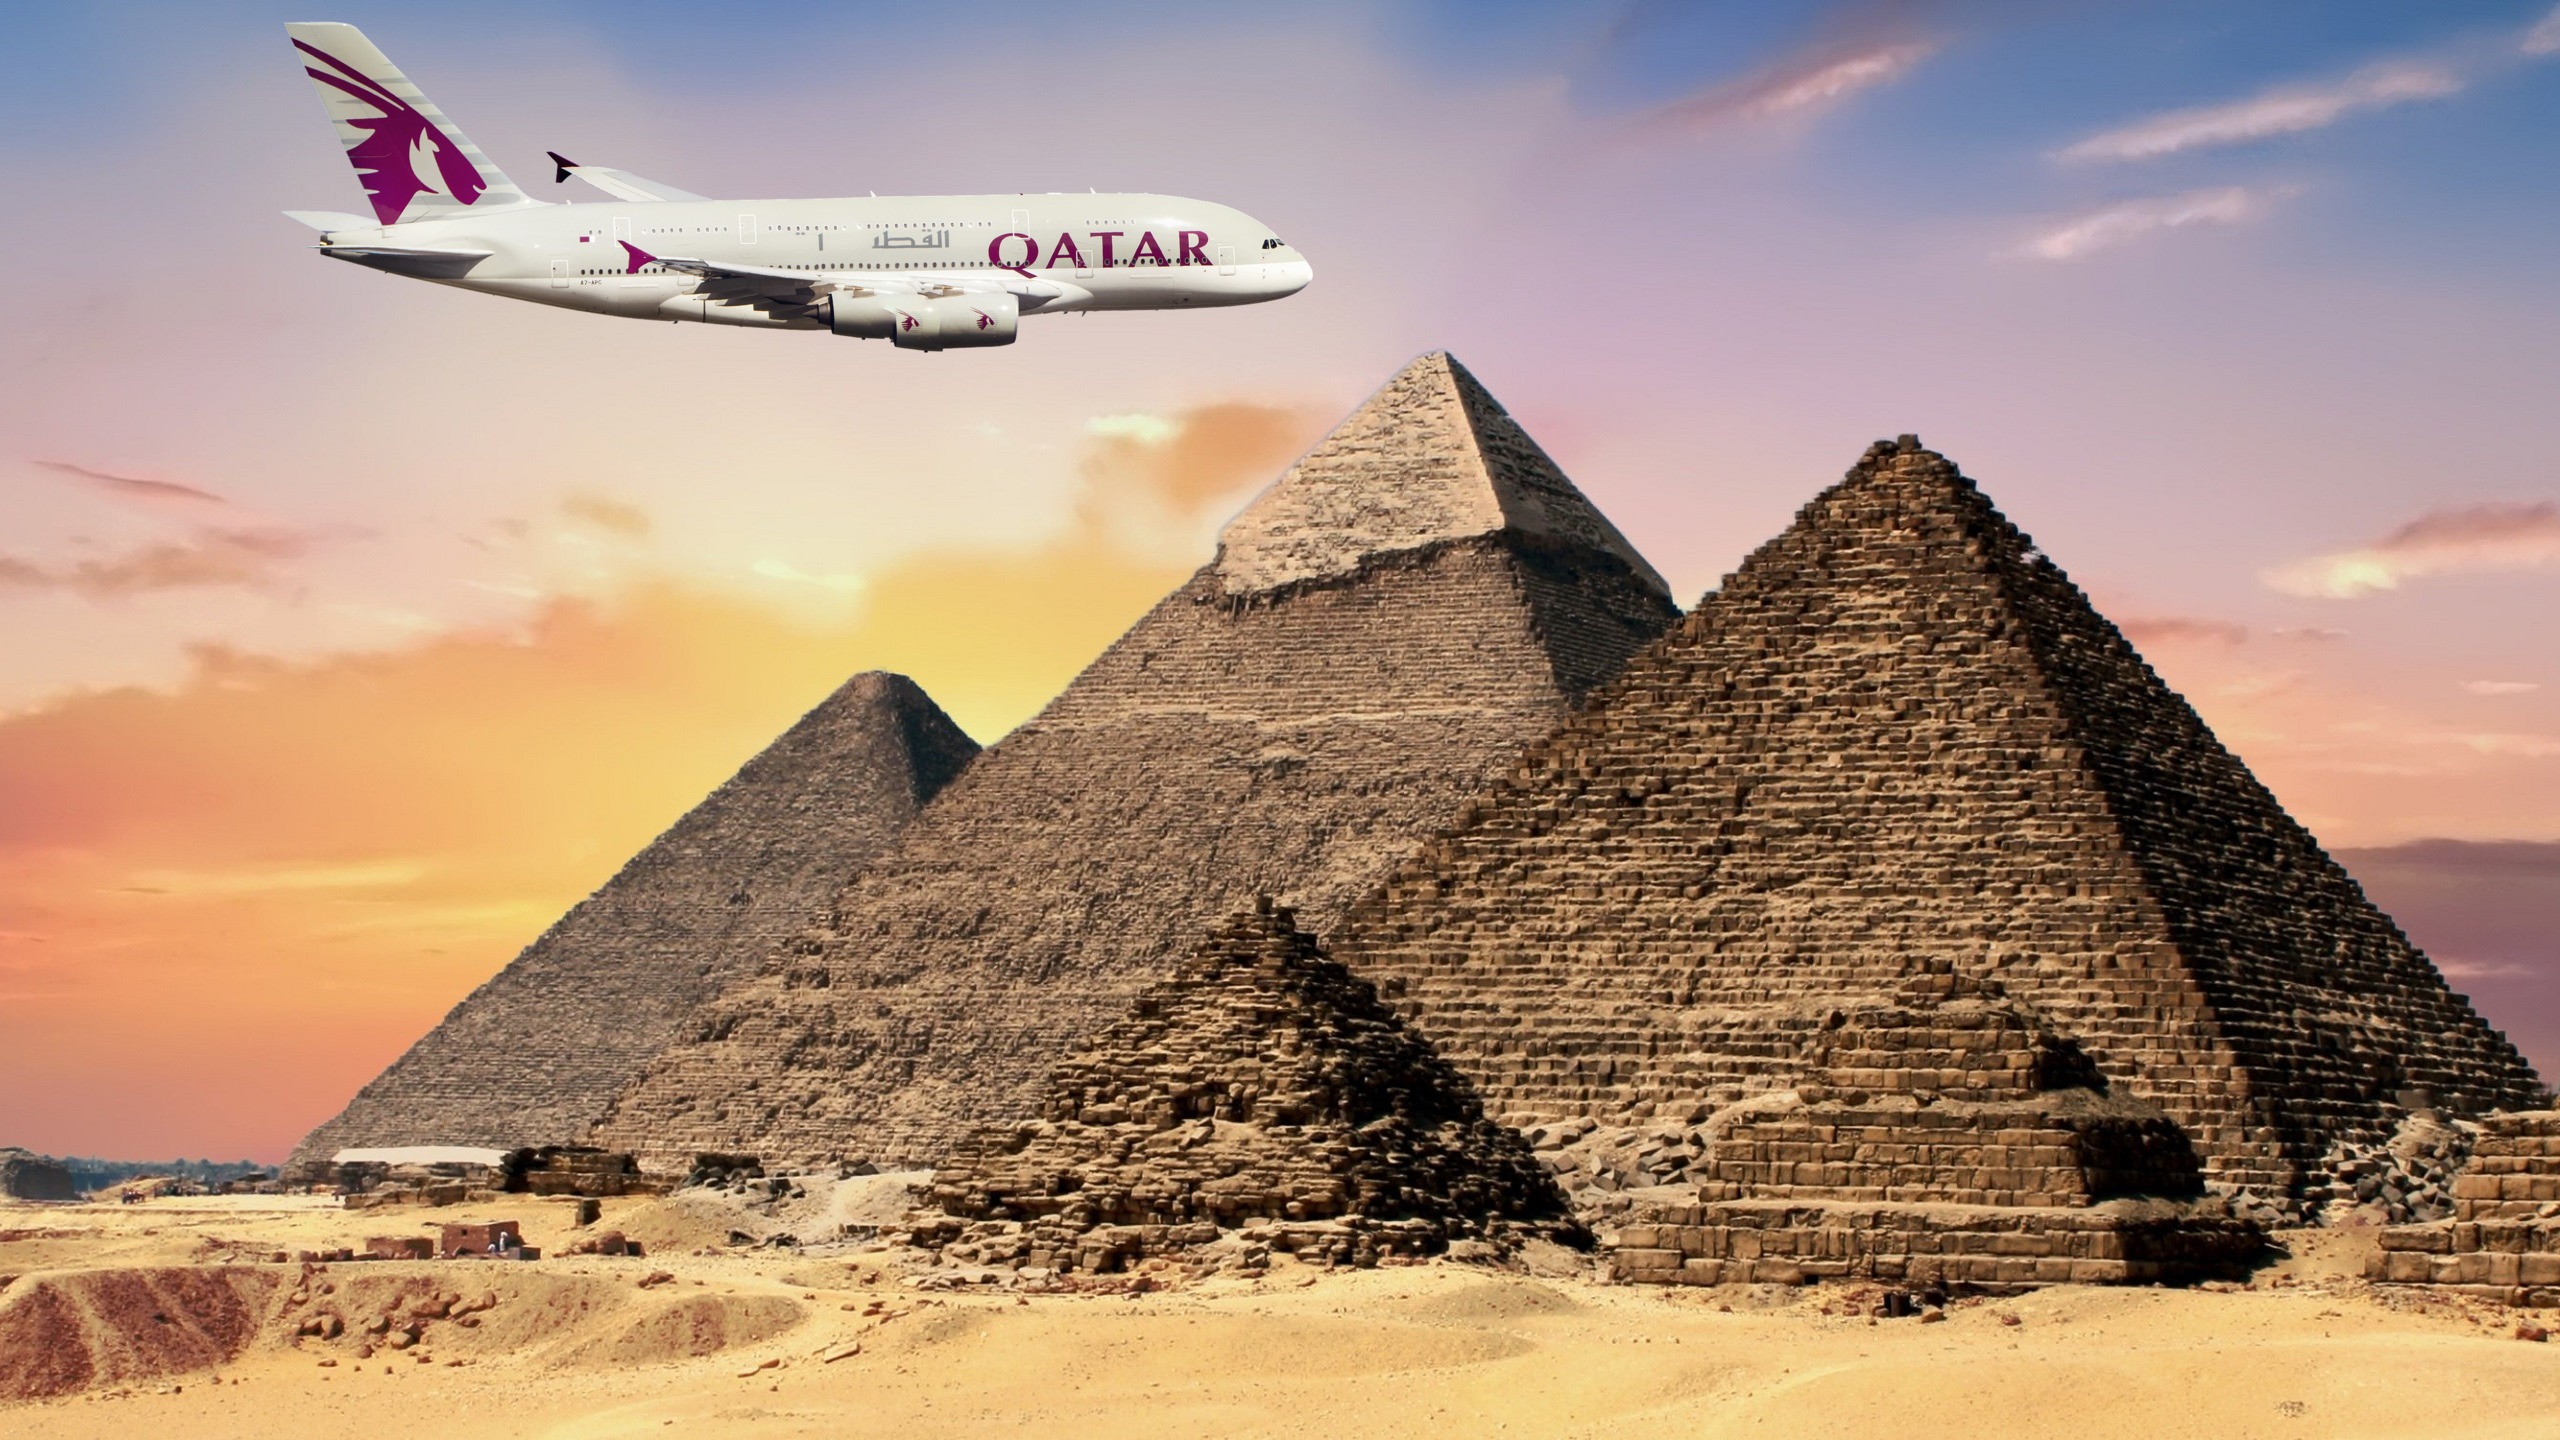 Egypt Qatar airspace and flights